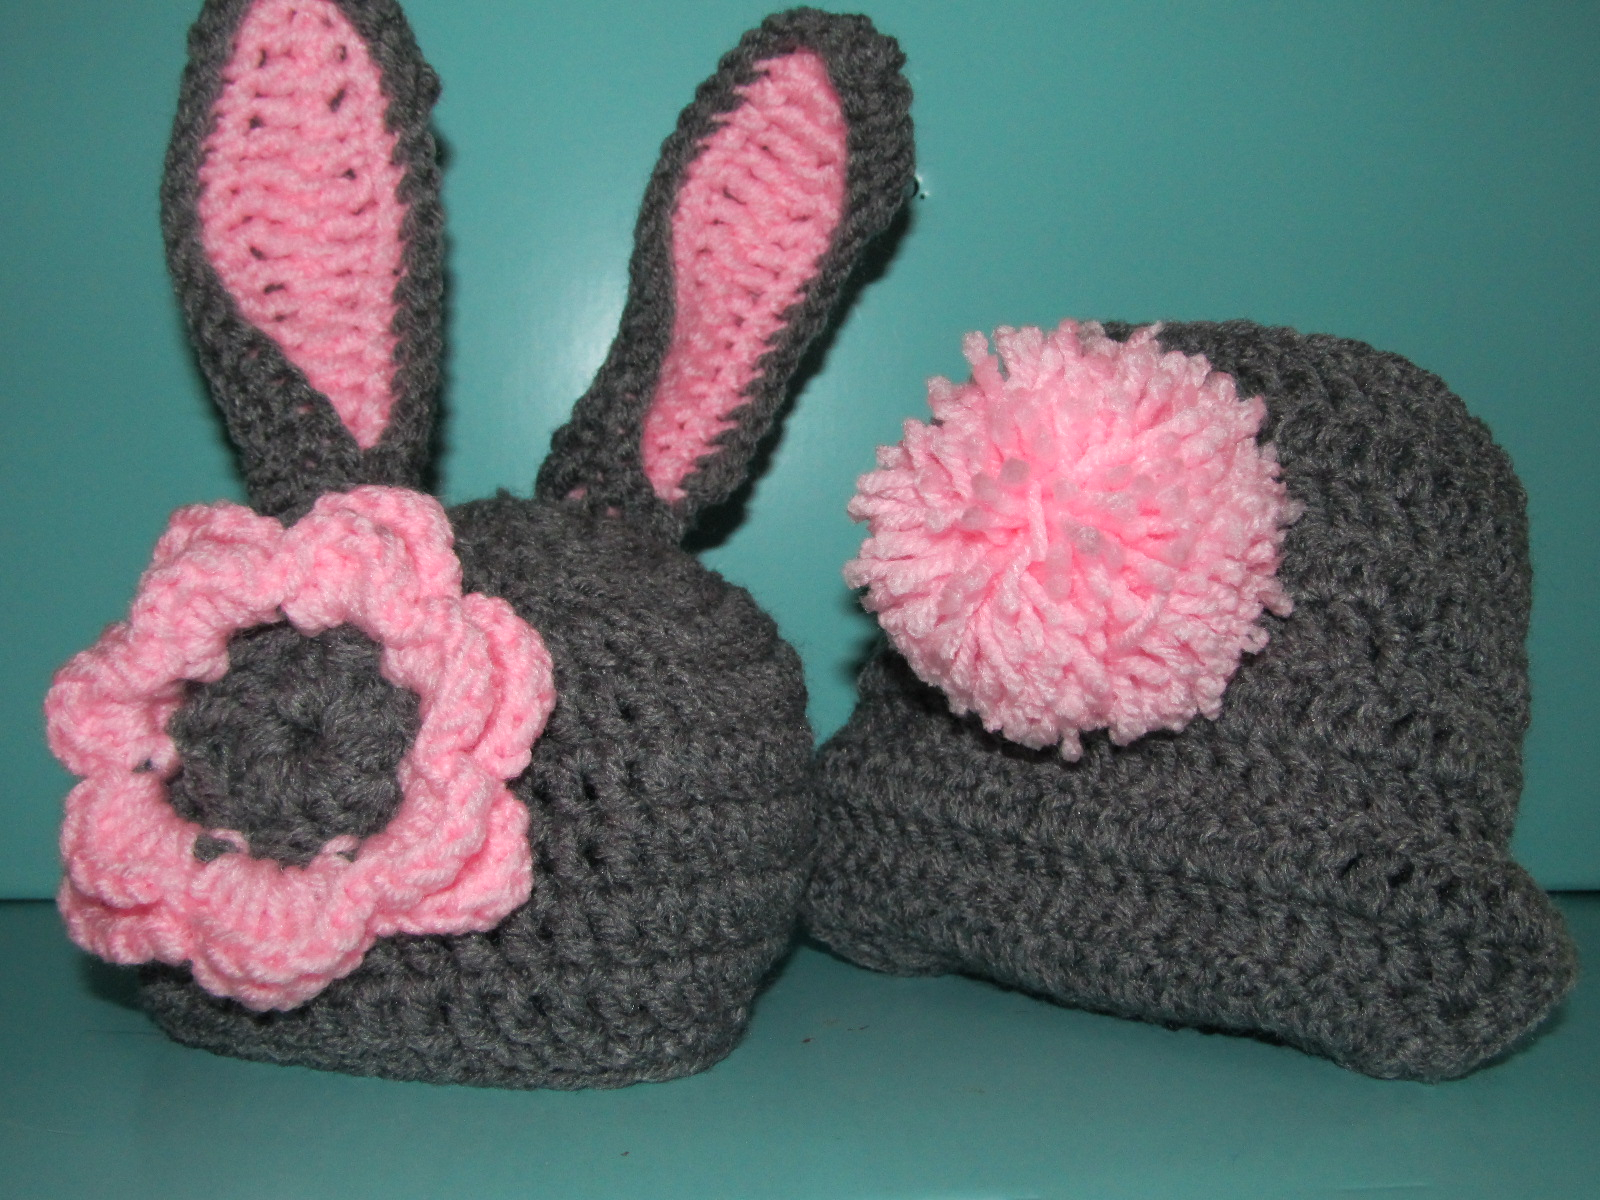 Crochet Baby Hat And Diaper Cover Pattern Simply Crochet And Other Crafts Bunny Newborn Ba Prop